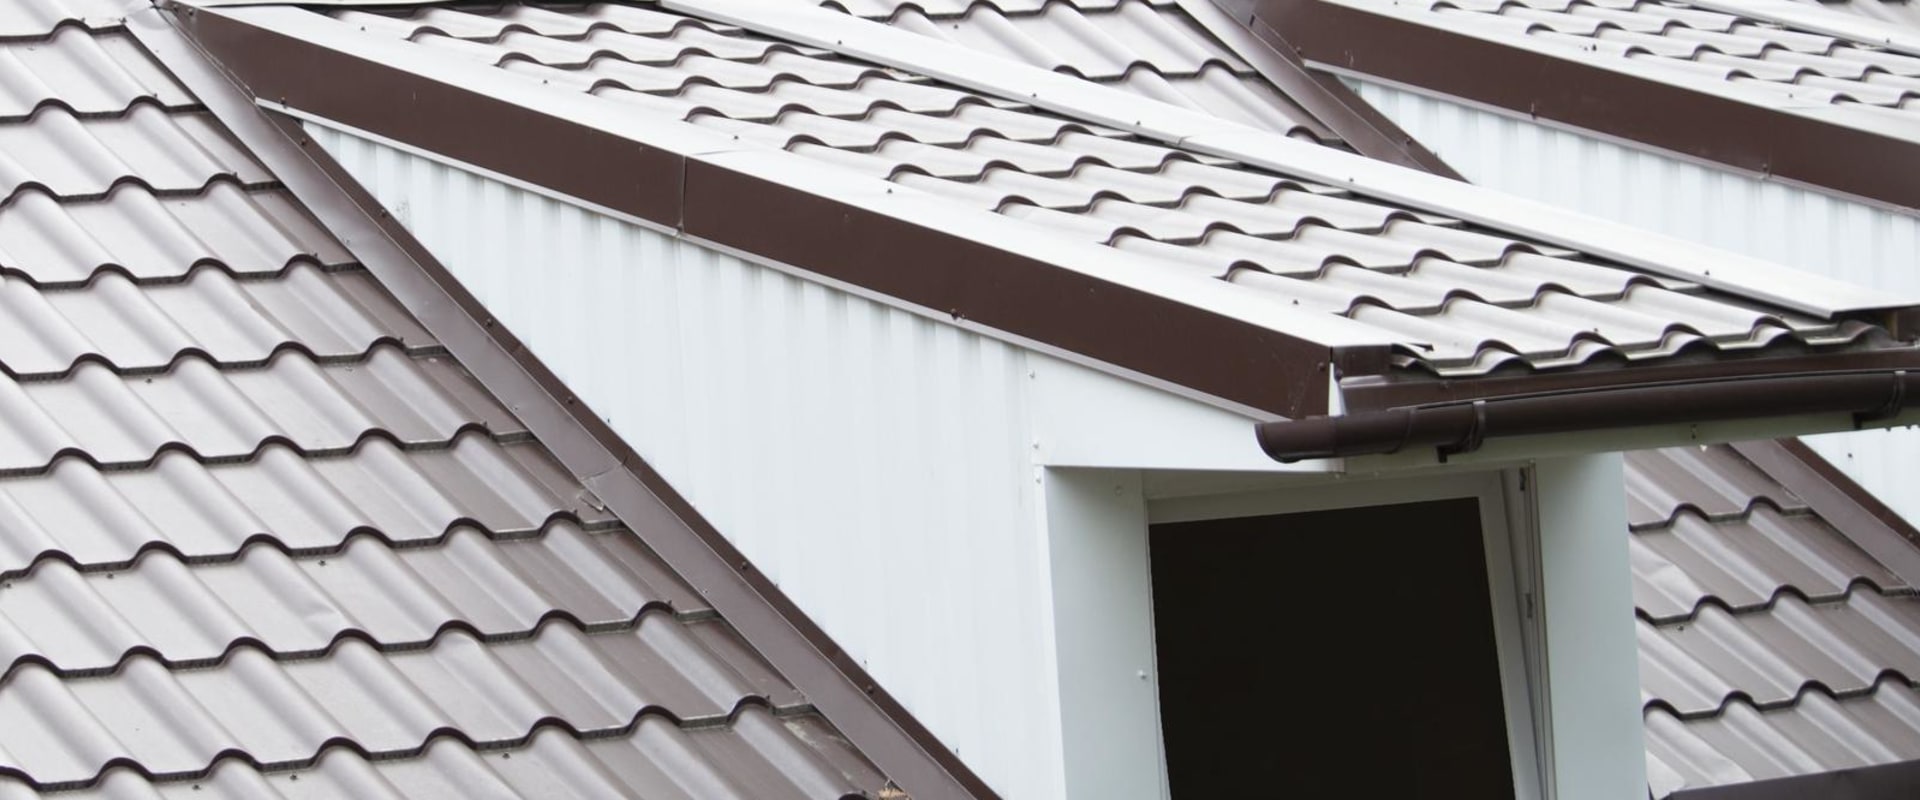 The Benefits Of Metal Roofing: Why Plainfield, NJ Residents Should Consider It For Their Homes